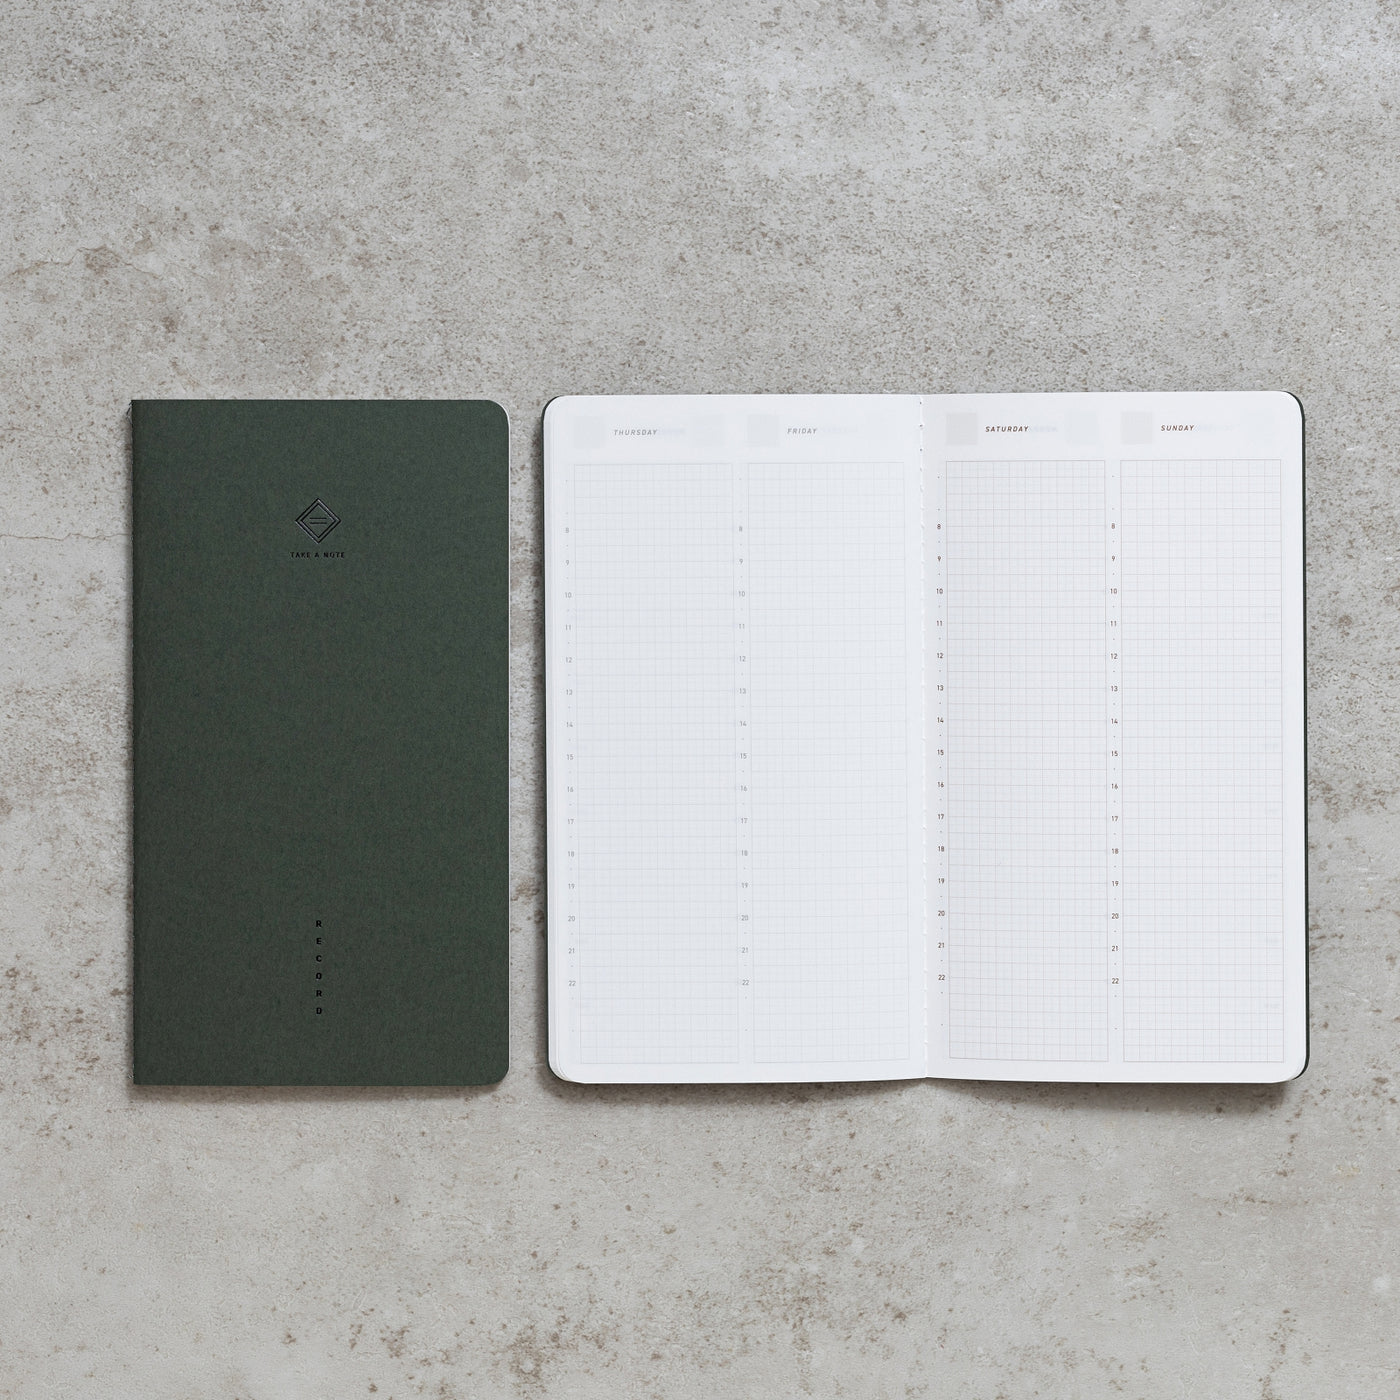 Take a Note "RECORD" - LITE Undated Hybrid Daily Planner